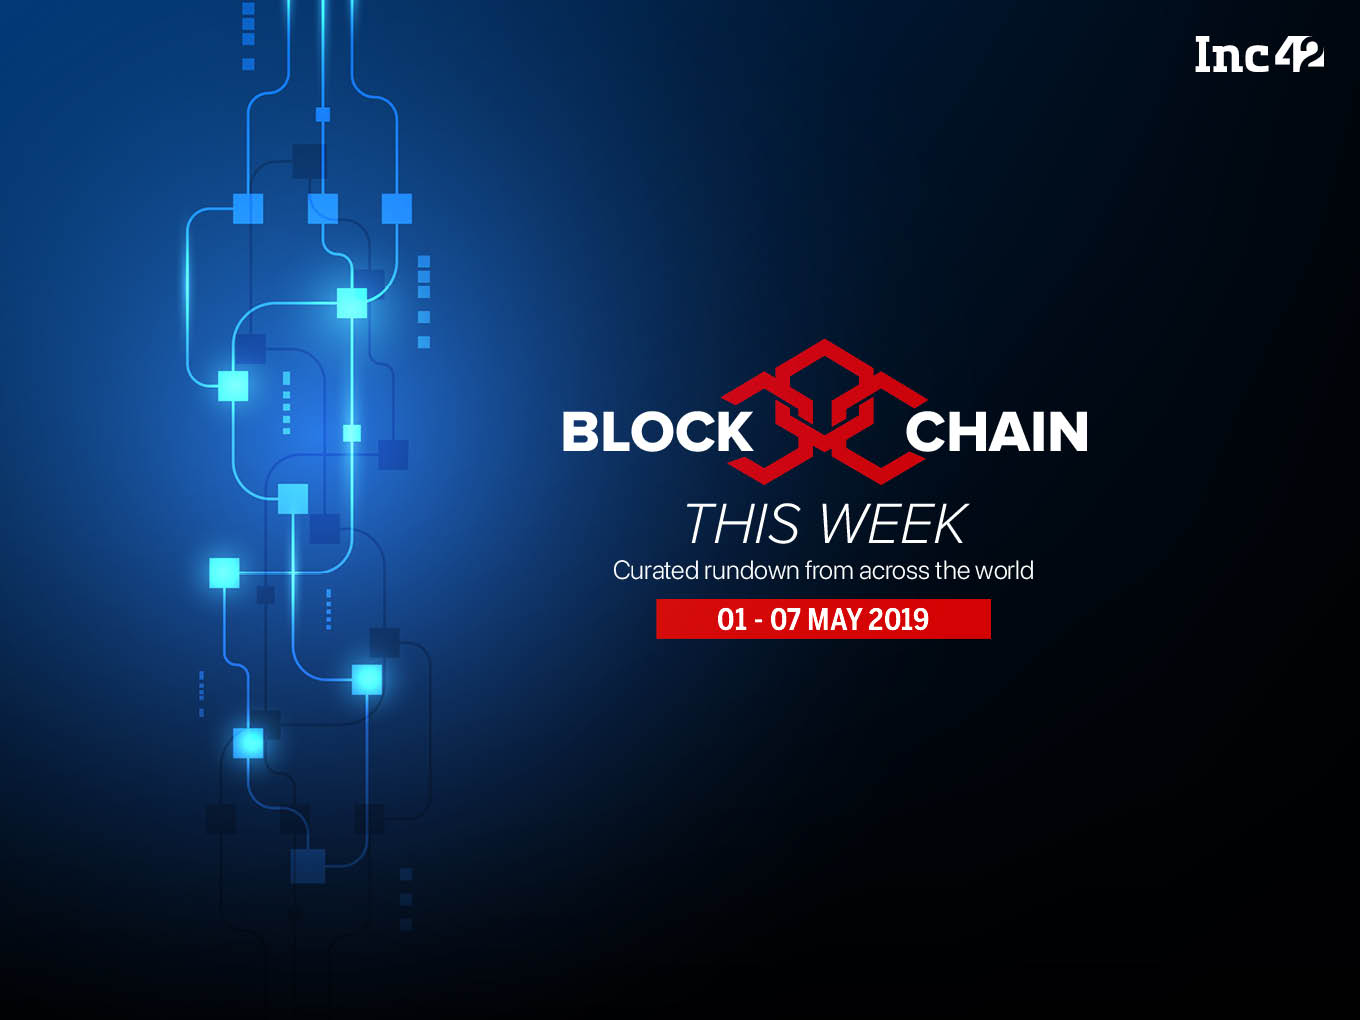 Blockchain This Week: Tech Mahindra Launches Blockchain Service To Curb Spam Calls And More